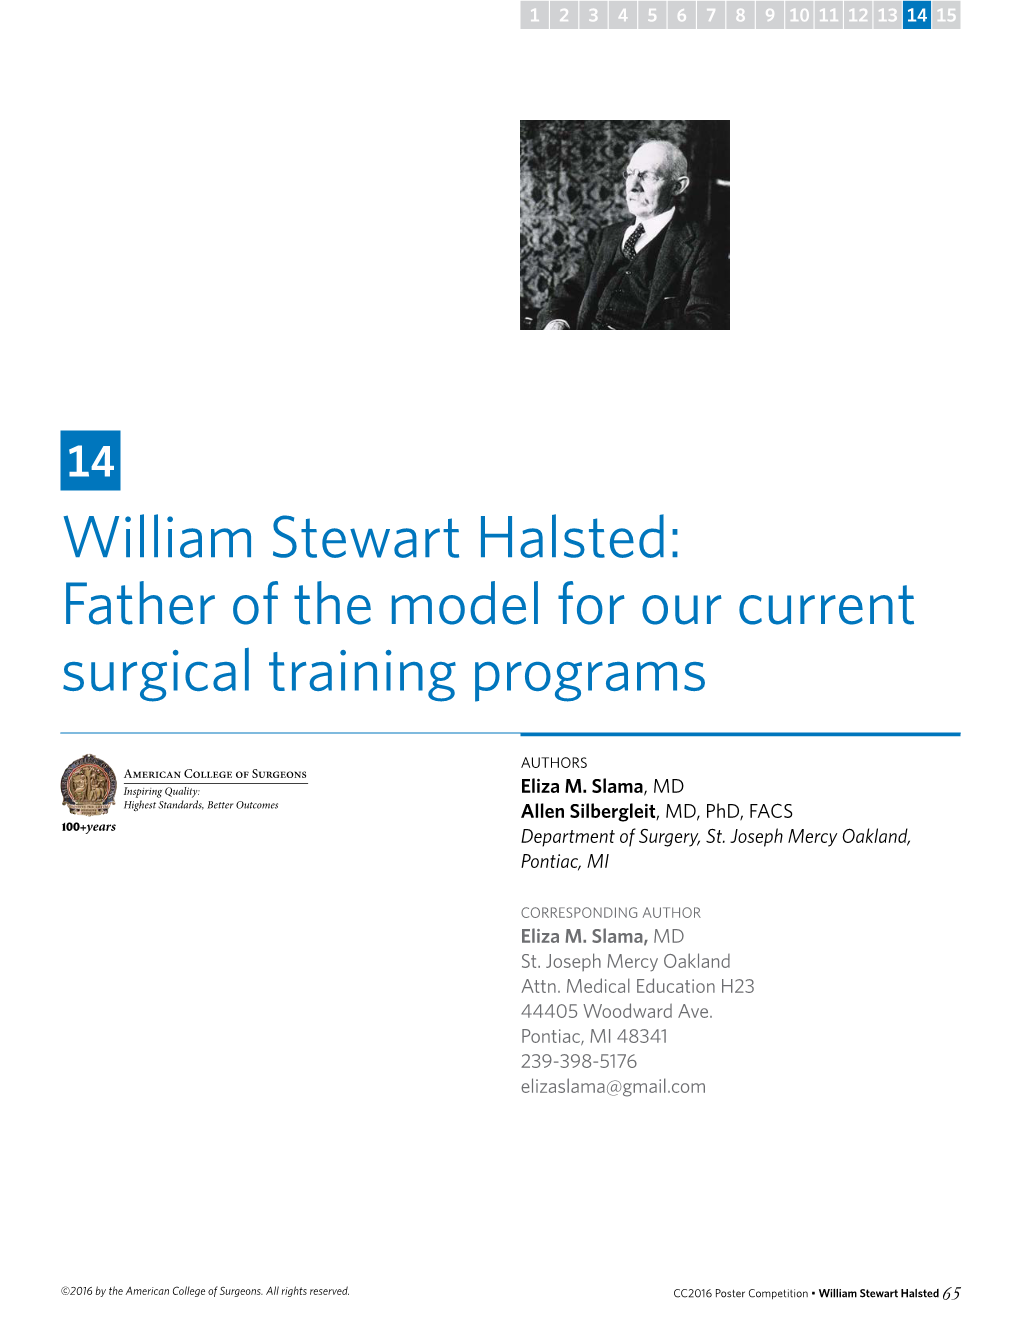 William Stewart Halsted: Father of the Model for Our Current Surgical Training Programs